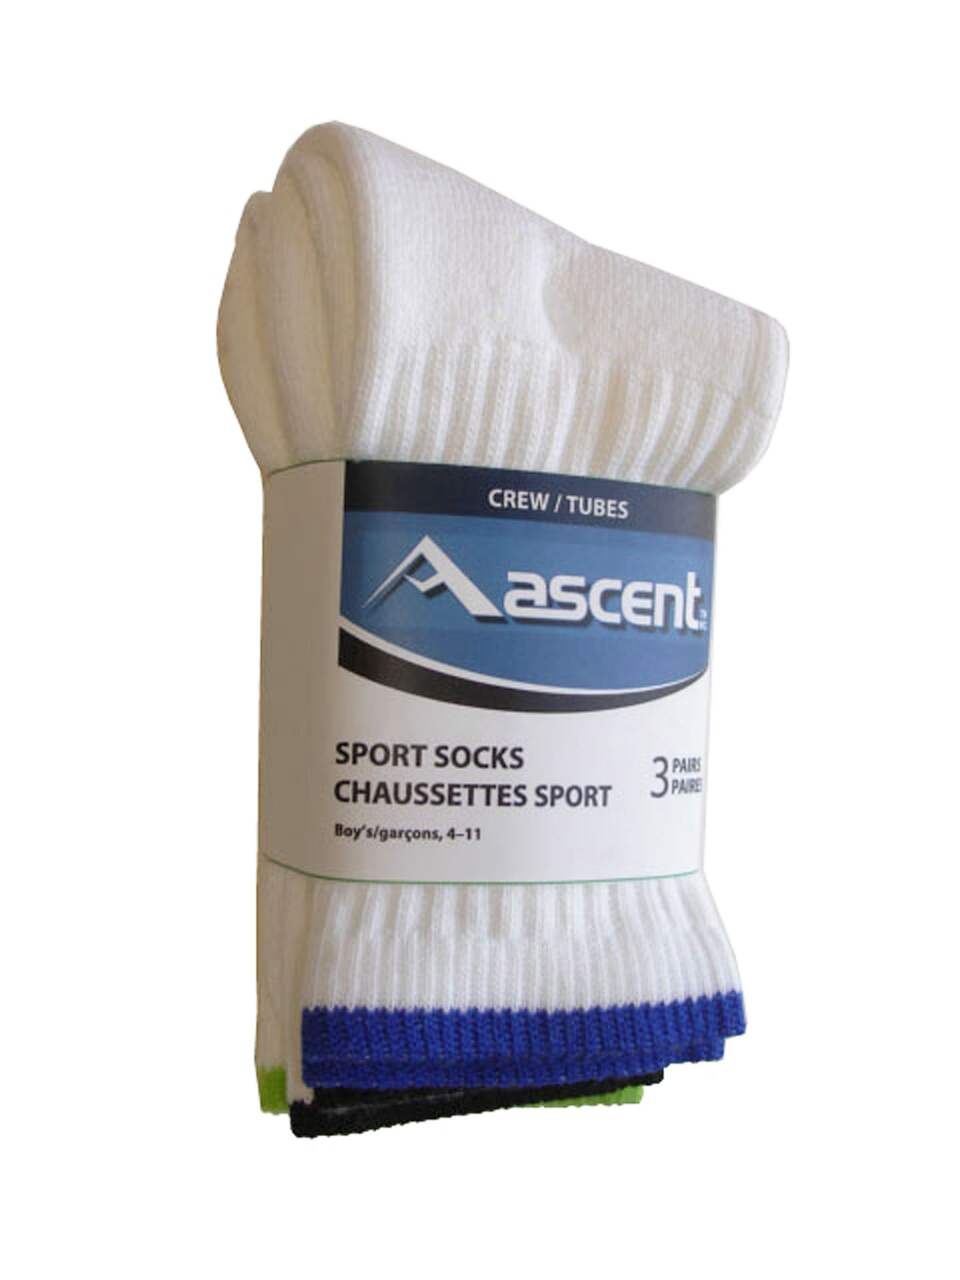 Outbound Women's Athletic Quarter-Crew Socks with Cushioned Sole, 6-pk,  Assorted Colours